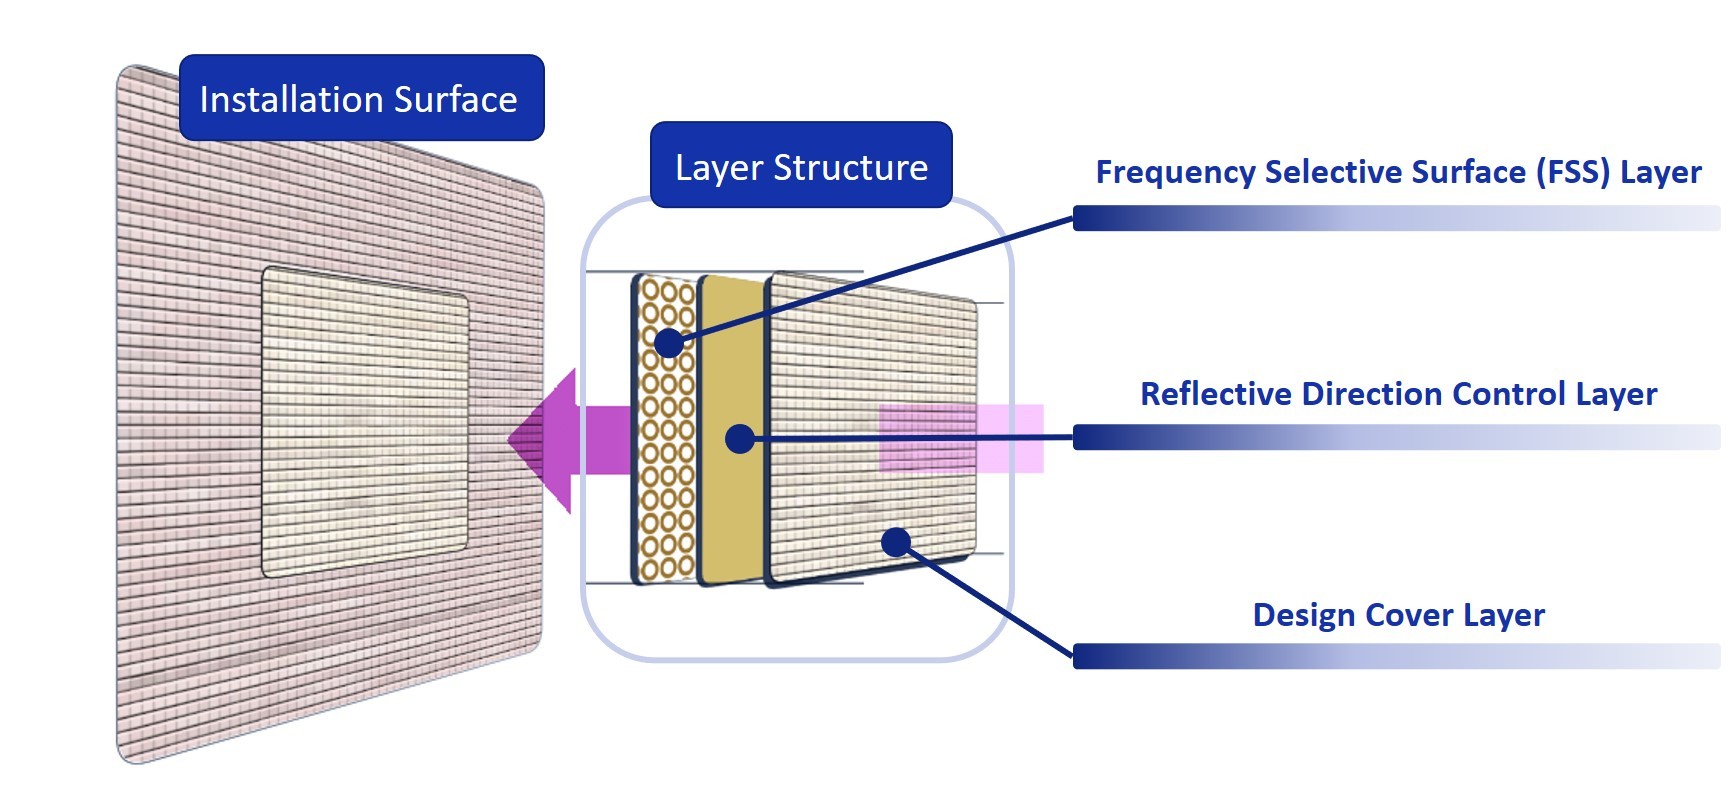 DNP develops reflect arrays to improve 5G coverage